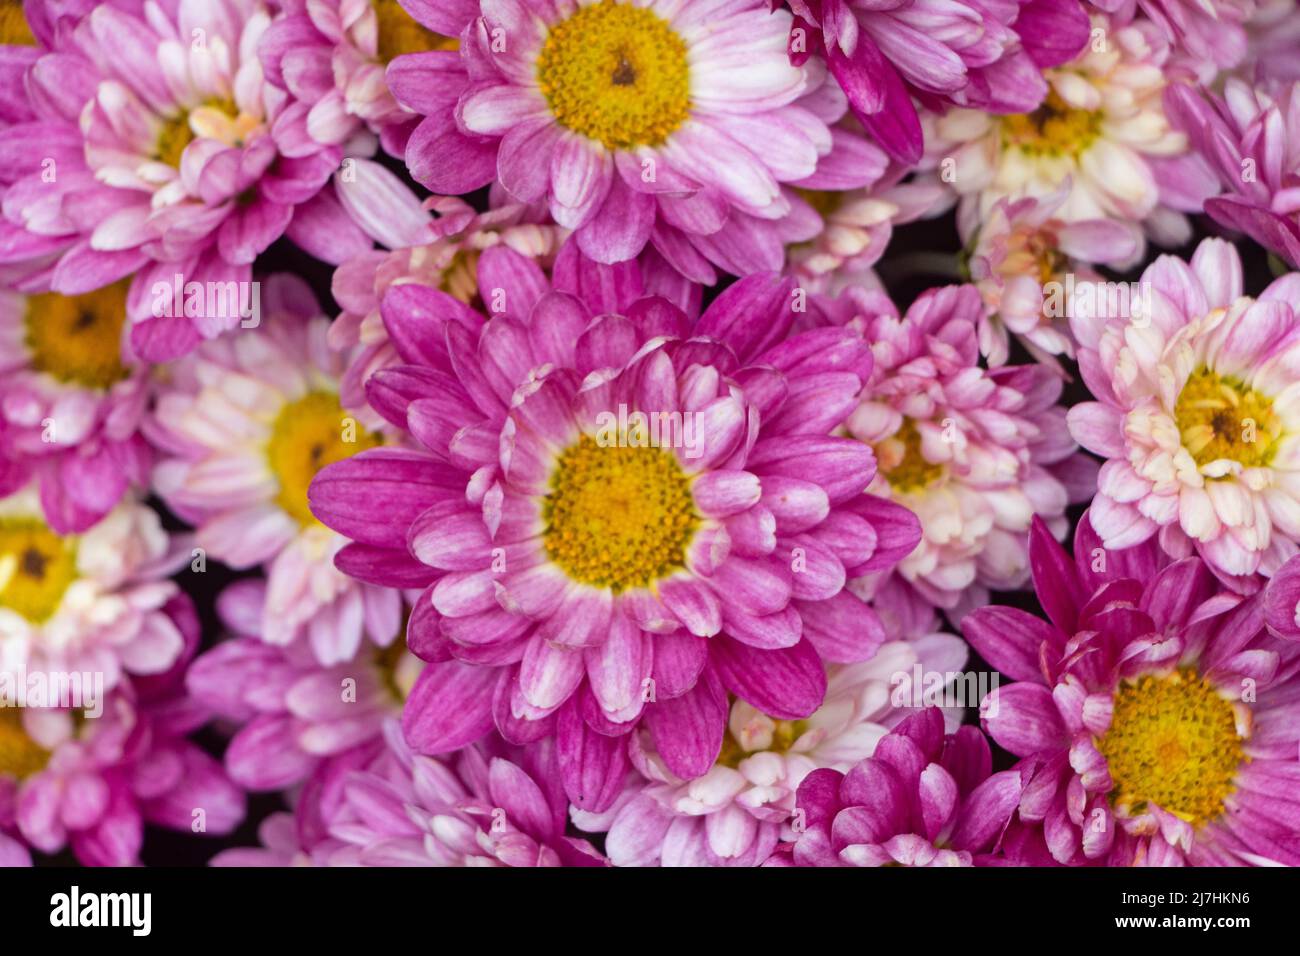 Close up on chrysanthemum plant for tombstones for All Saints Day Stock Photo